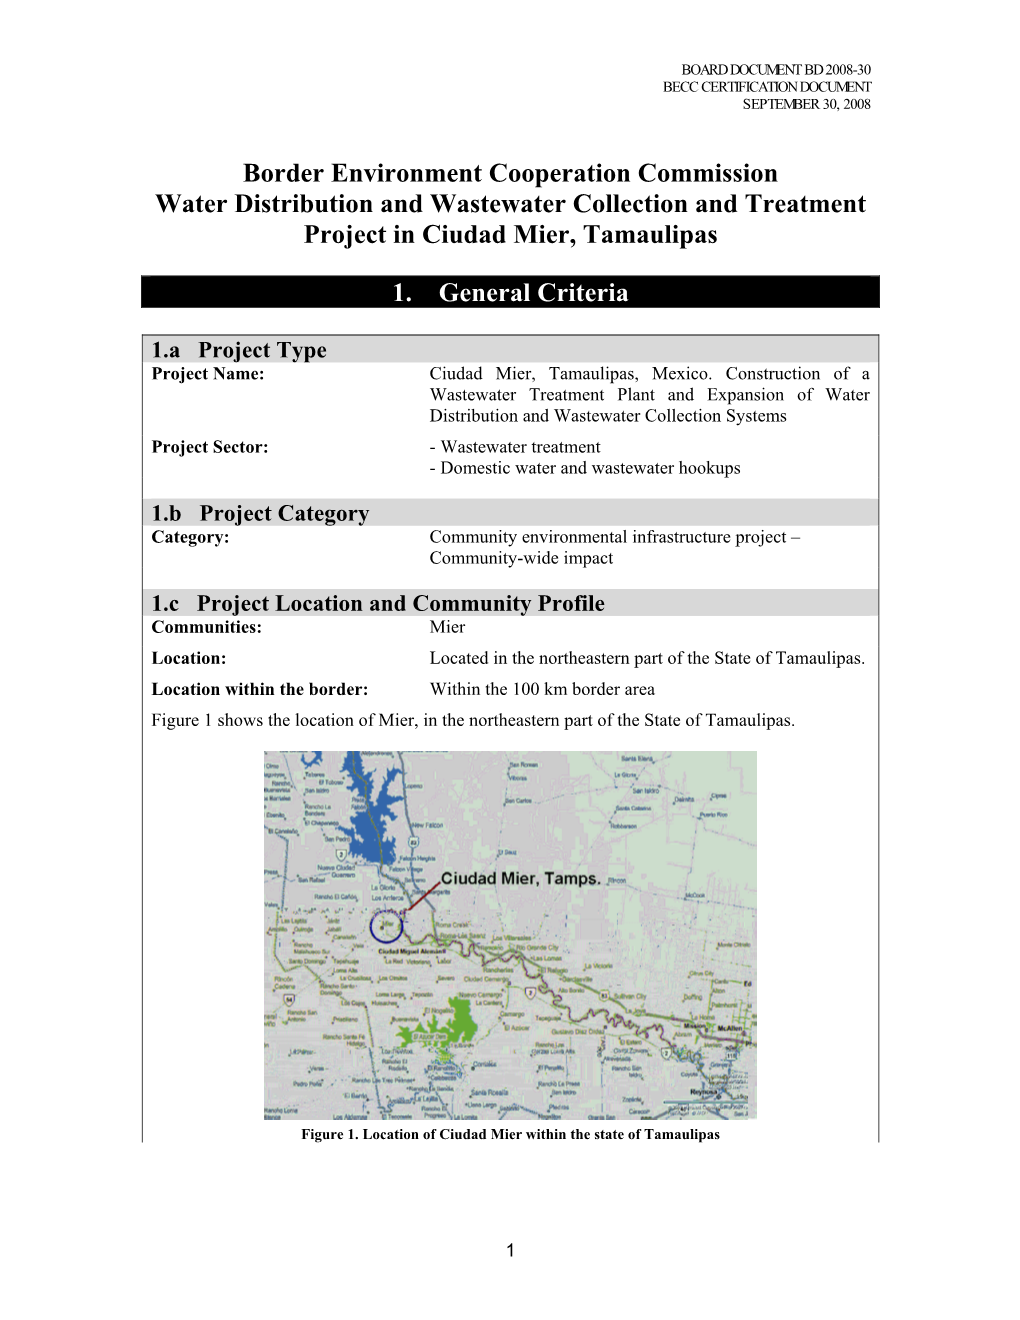 Border Environment Cooperation Commission Water Distribution and Wastewater Collection and Treatment Project in Ciudad Mier, Tamaulipas